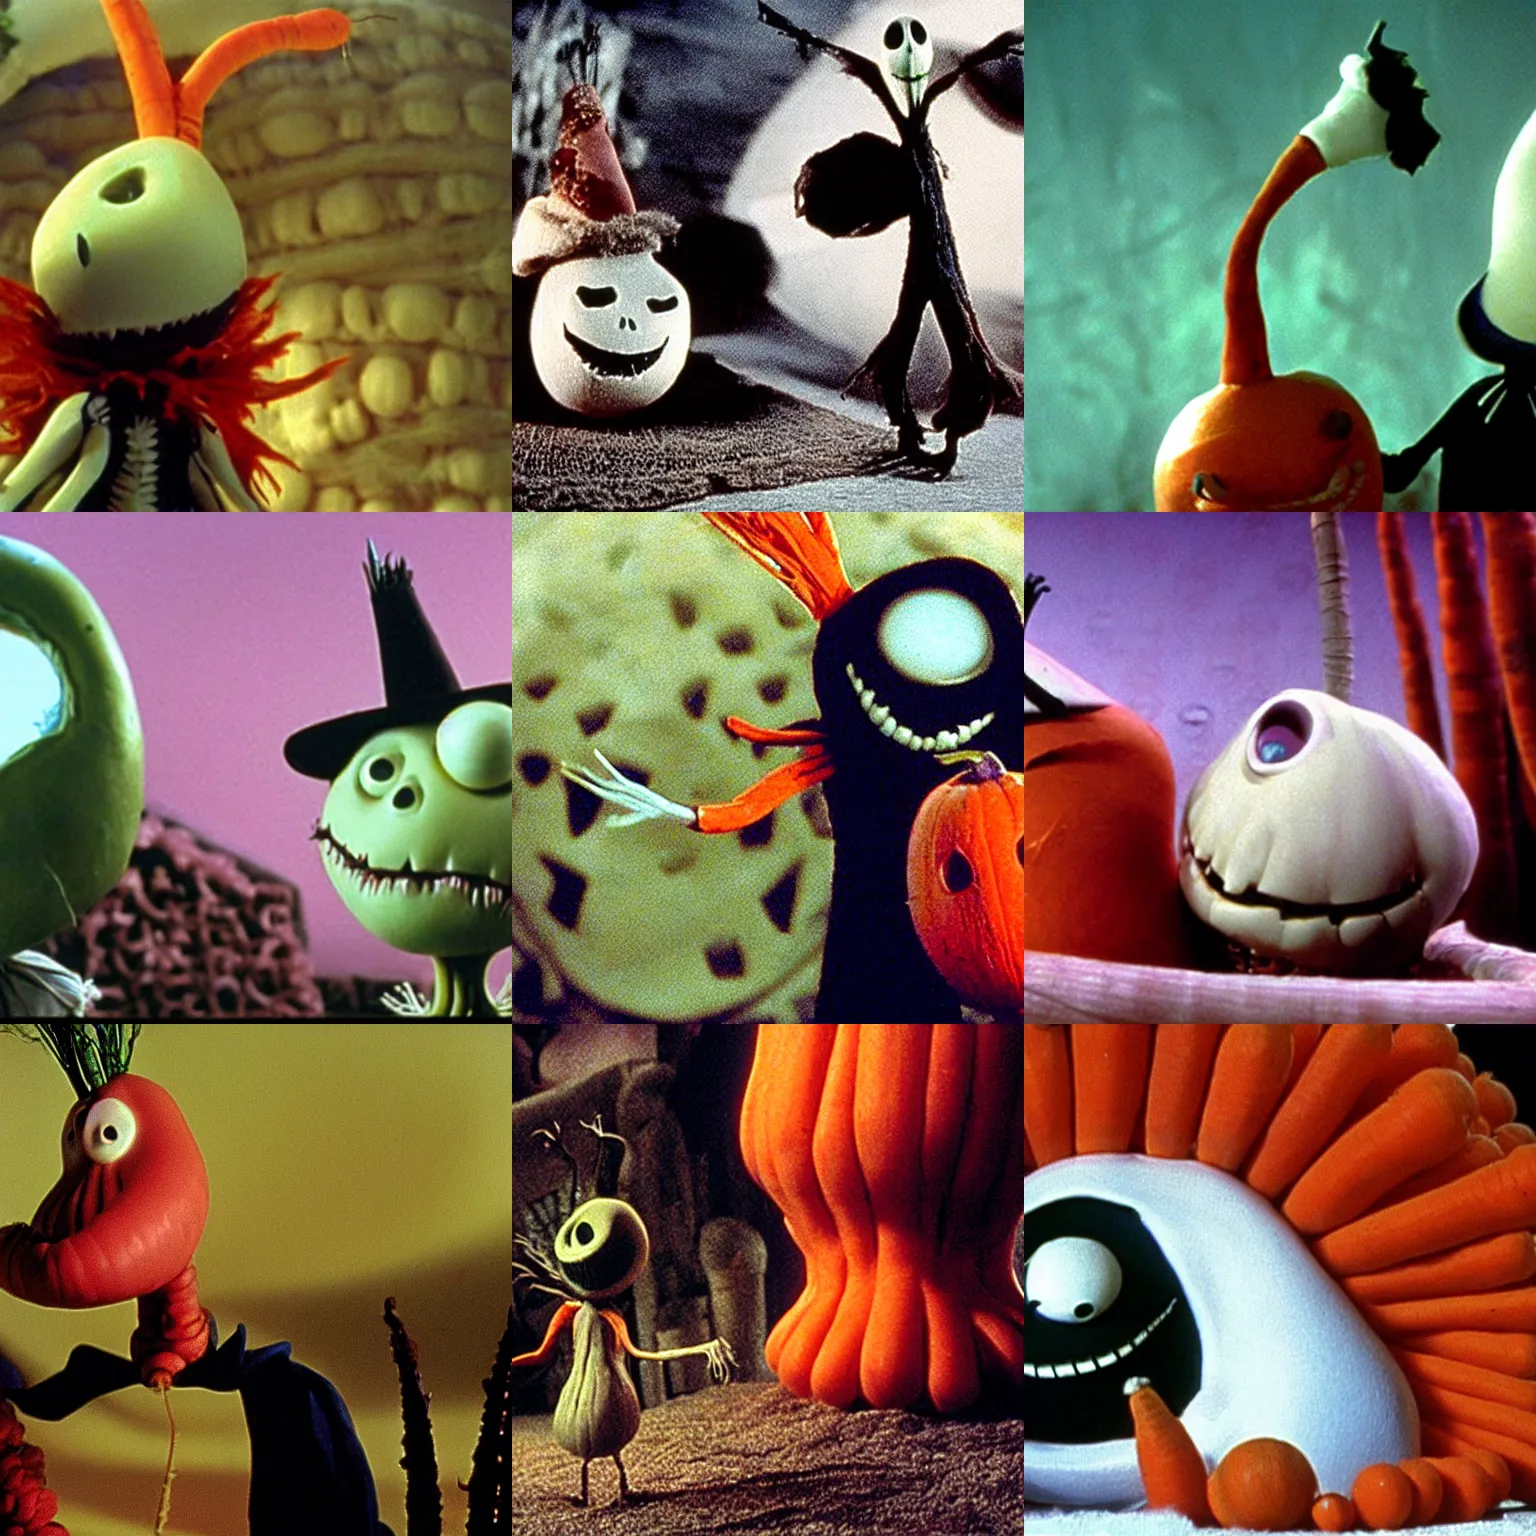 Prompt: film still of a scary carrot in the nightmare before Christmas by tim Burton